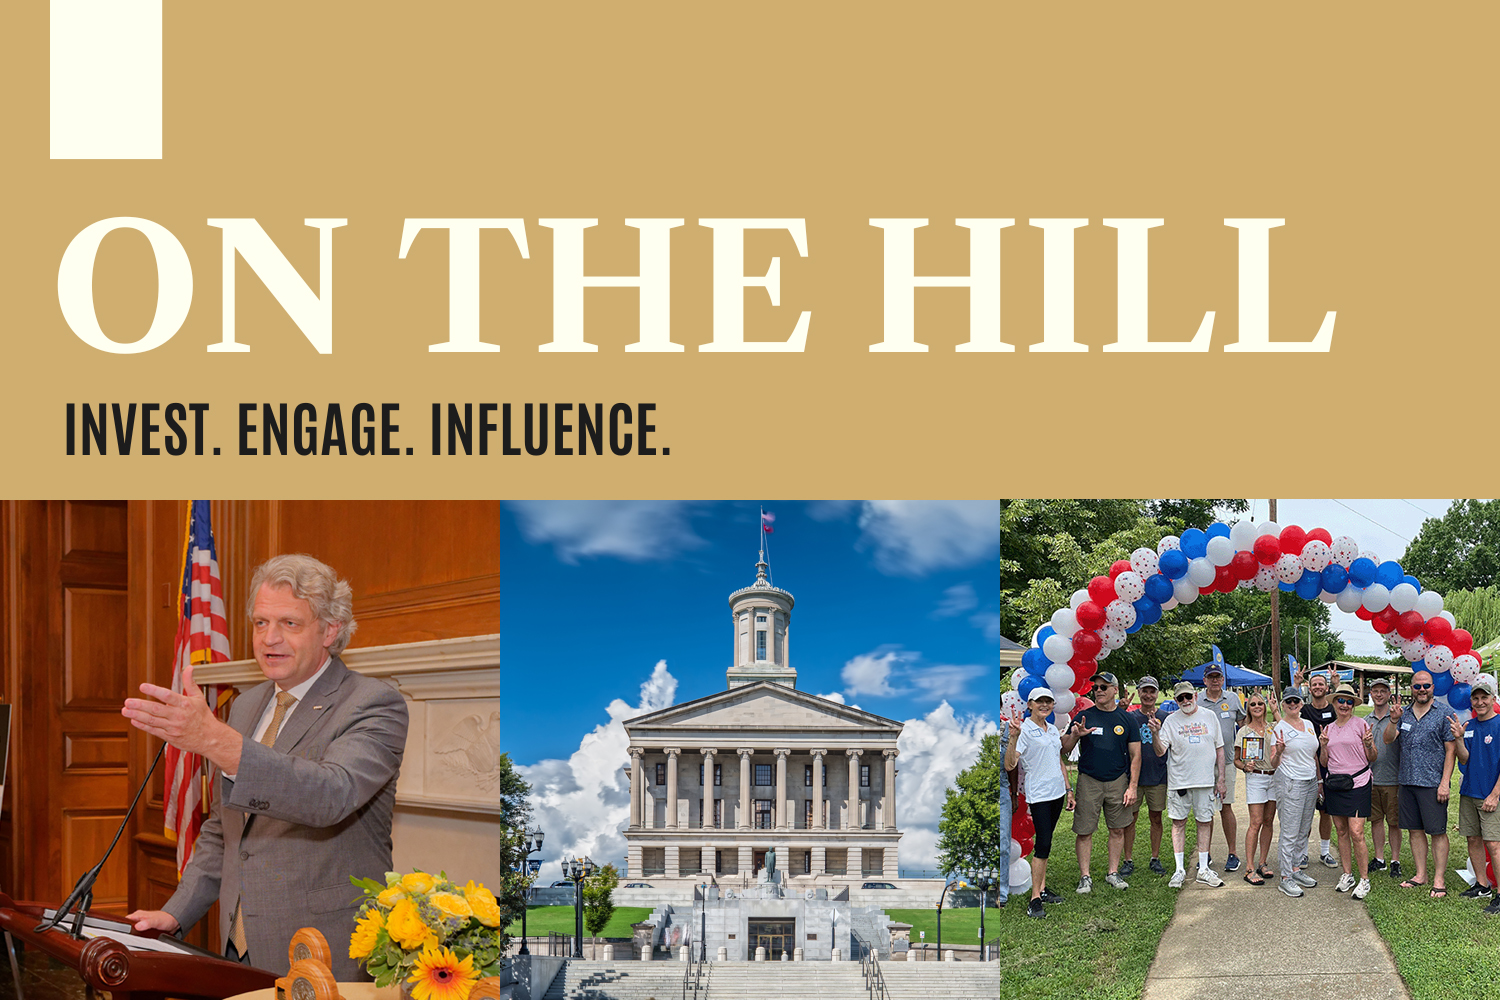 ON THE HILL, Invest. Engage. Influence.